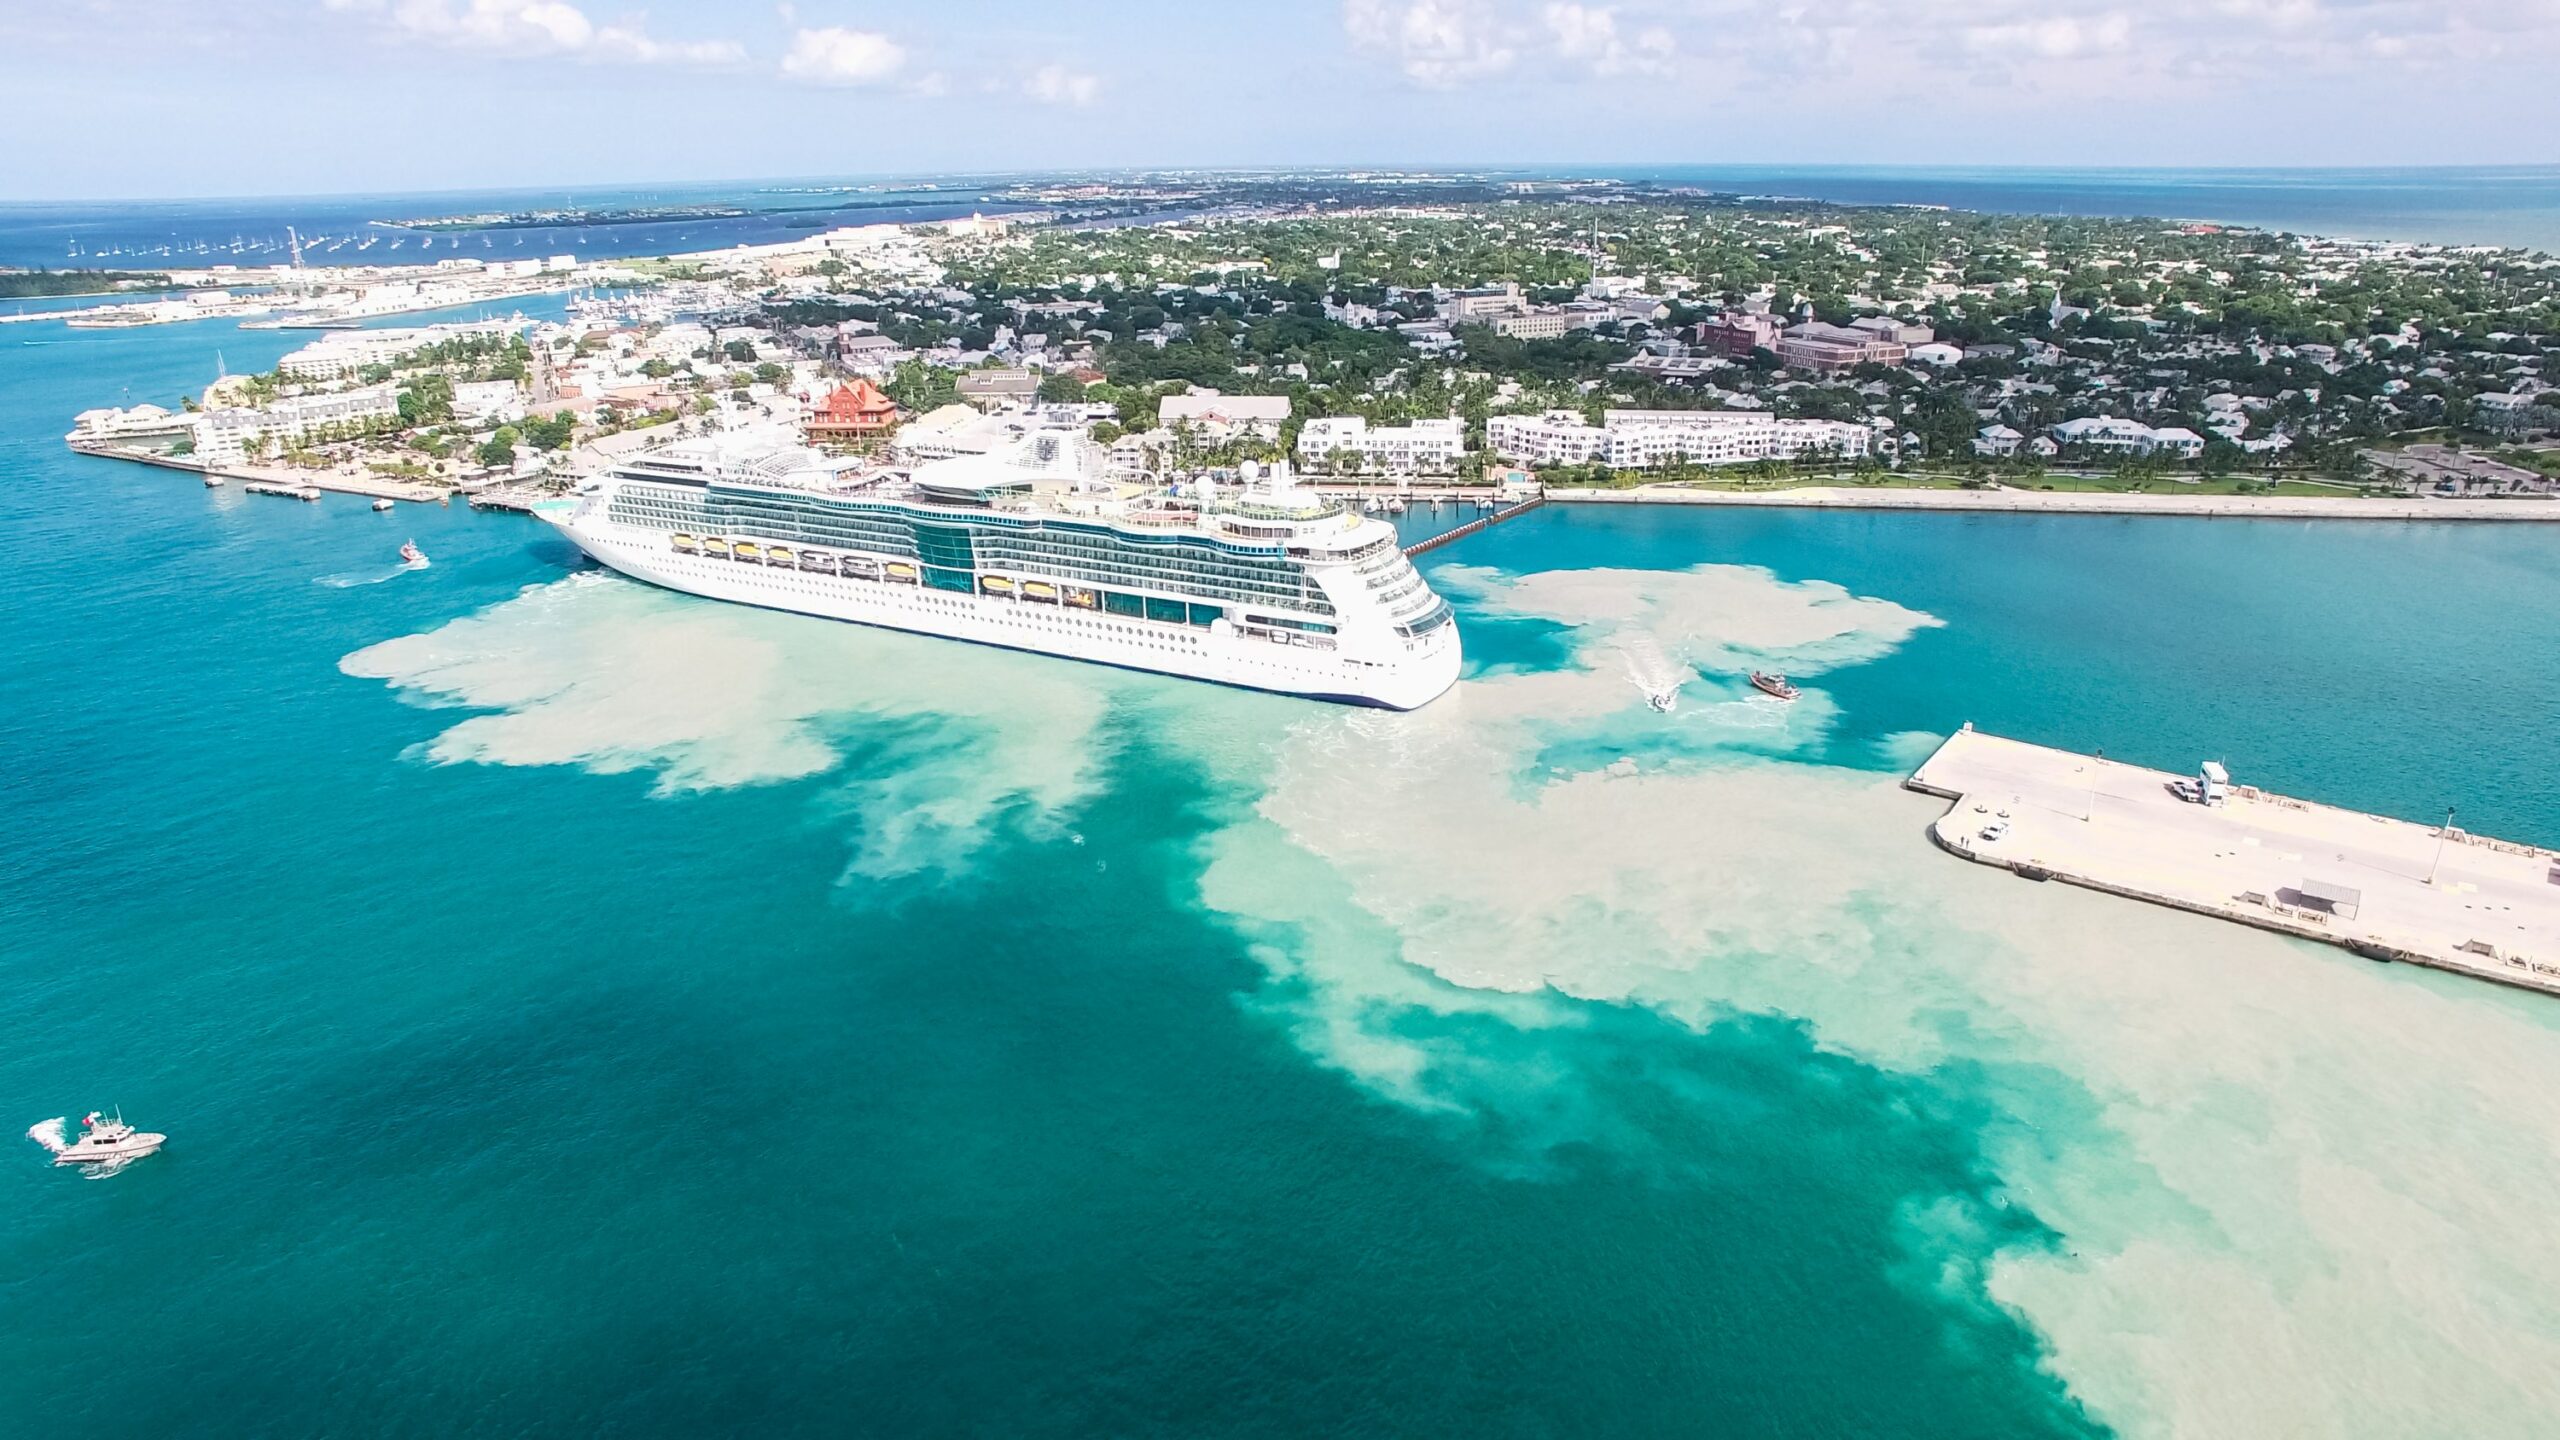 Key West Cruise Ship Schedule 2022 As Huge Cruise Ships Return, Key West Locals Decry Environmental Damage,  State Preemption